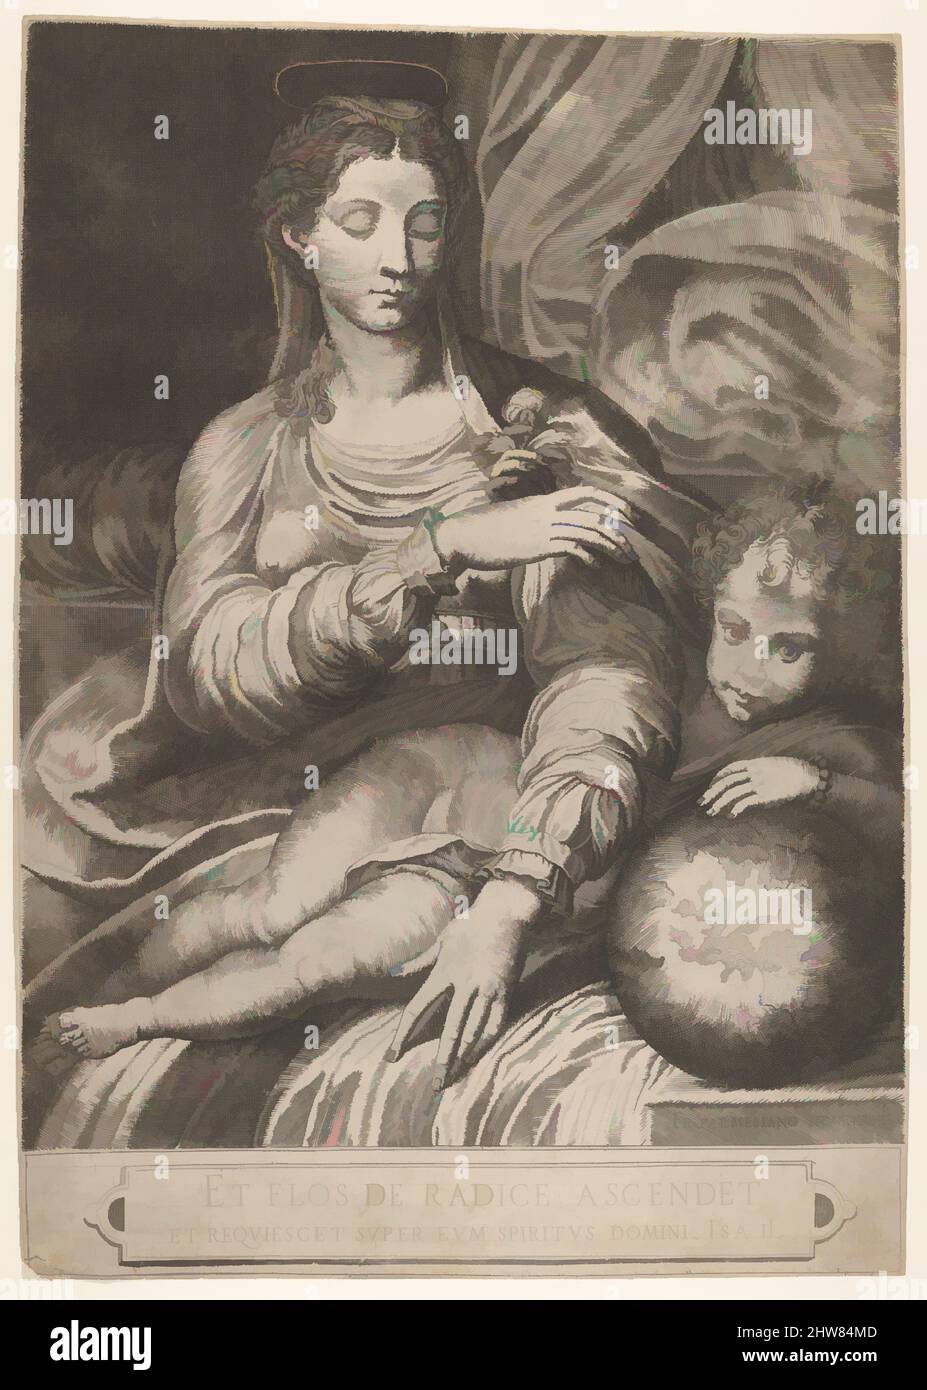 Art inspired by Madonna of the Rose, the Madonna reaches for a rose upheld by the child, who reclines on a drapery and rests his left arm on a globe, 1516, Engraving, Sheet: 18 11/16 x 13 5/16 in. (47.5 x 33.8 cm), Prints, Domenico Tibaldi (Italian, 1541–1583 (active Bologna)), After, Classic works modernized by Artotop with a splash of modernity. Shapes, color and value, eye-catching visual impact on art. Emotions through freedom of artworks in a contemporary way. A timeless message pursuing a wildly creative new direction. Artists turning to the digital medium and creating the Artotop NFT Stock Photo